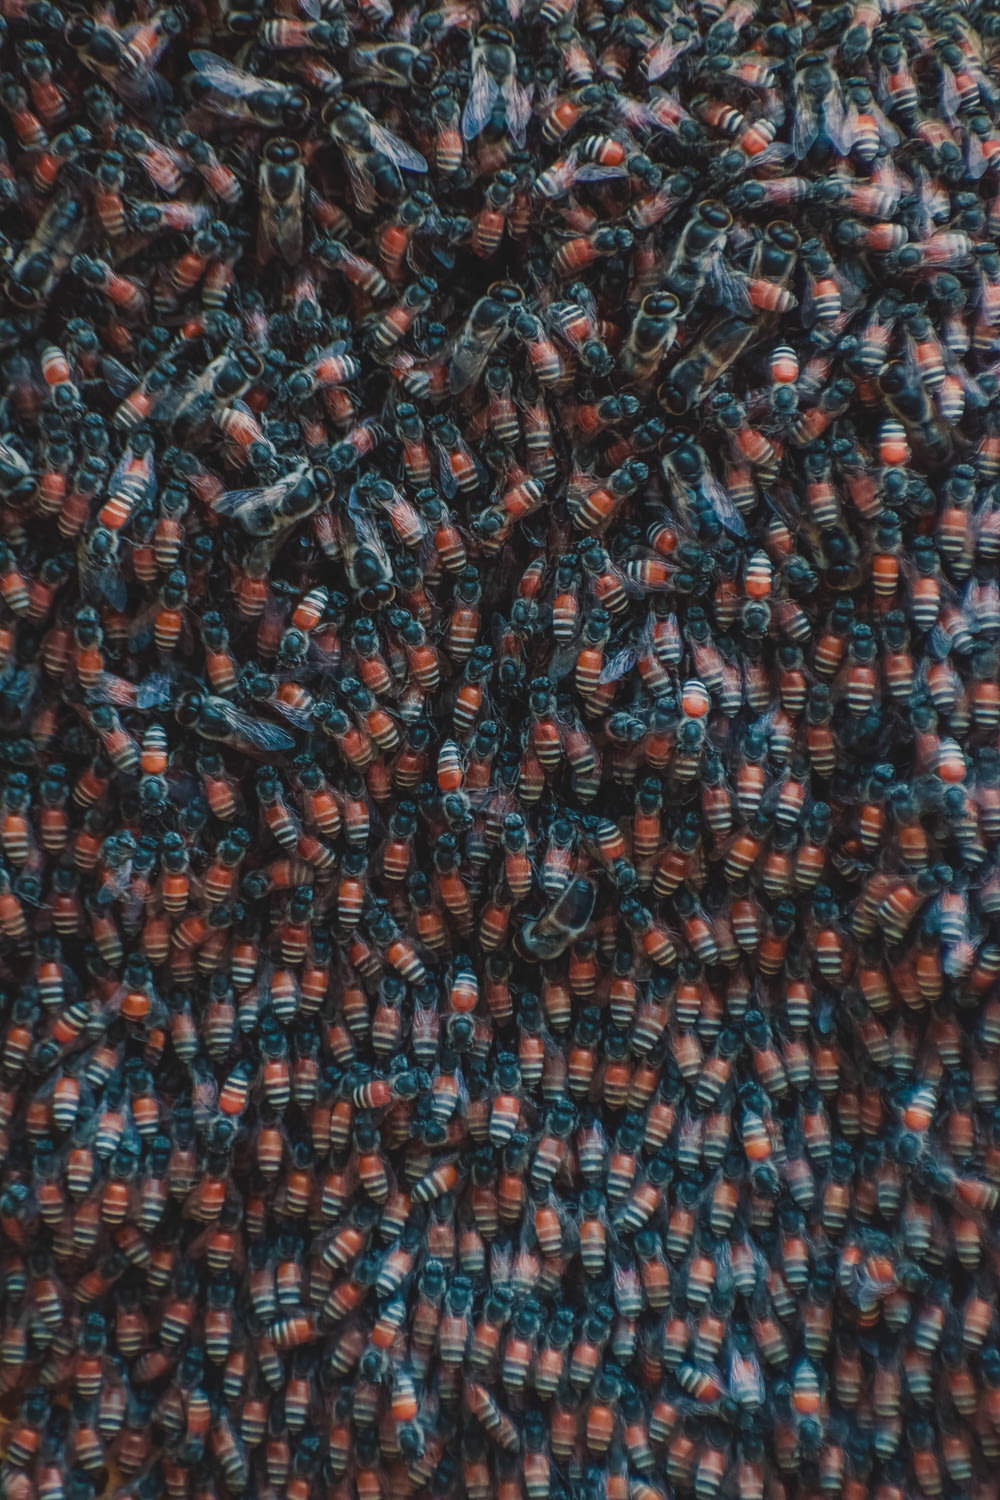 a close up view of a bunch of flies